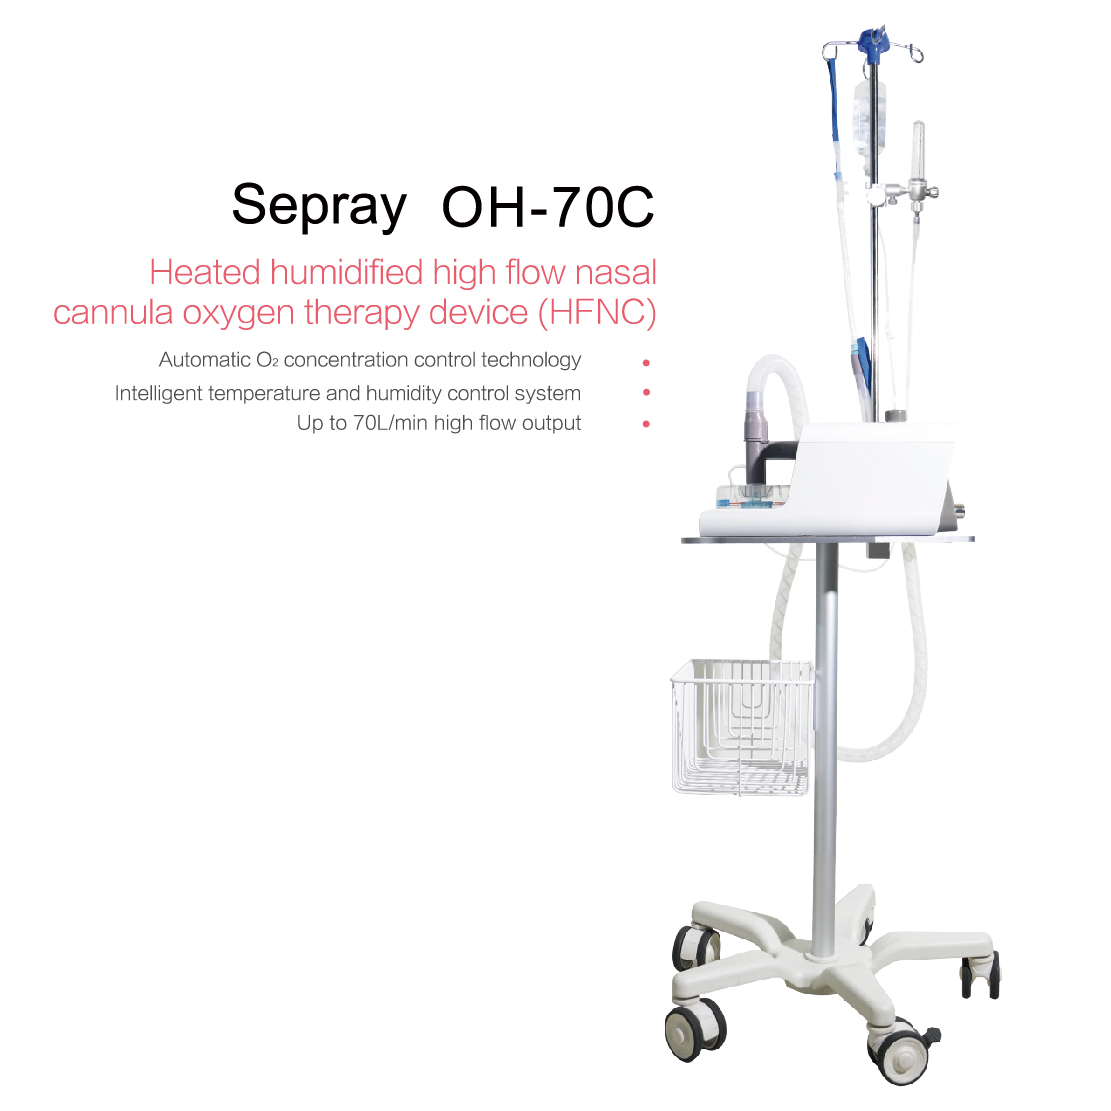 Heated humidified high flow nasal cannula oxygen therapy device OH-70C